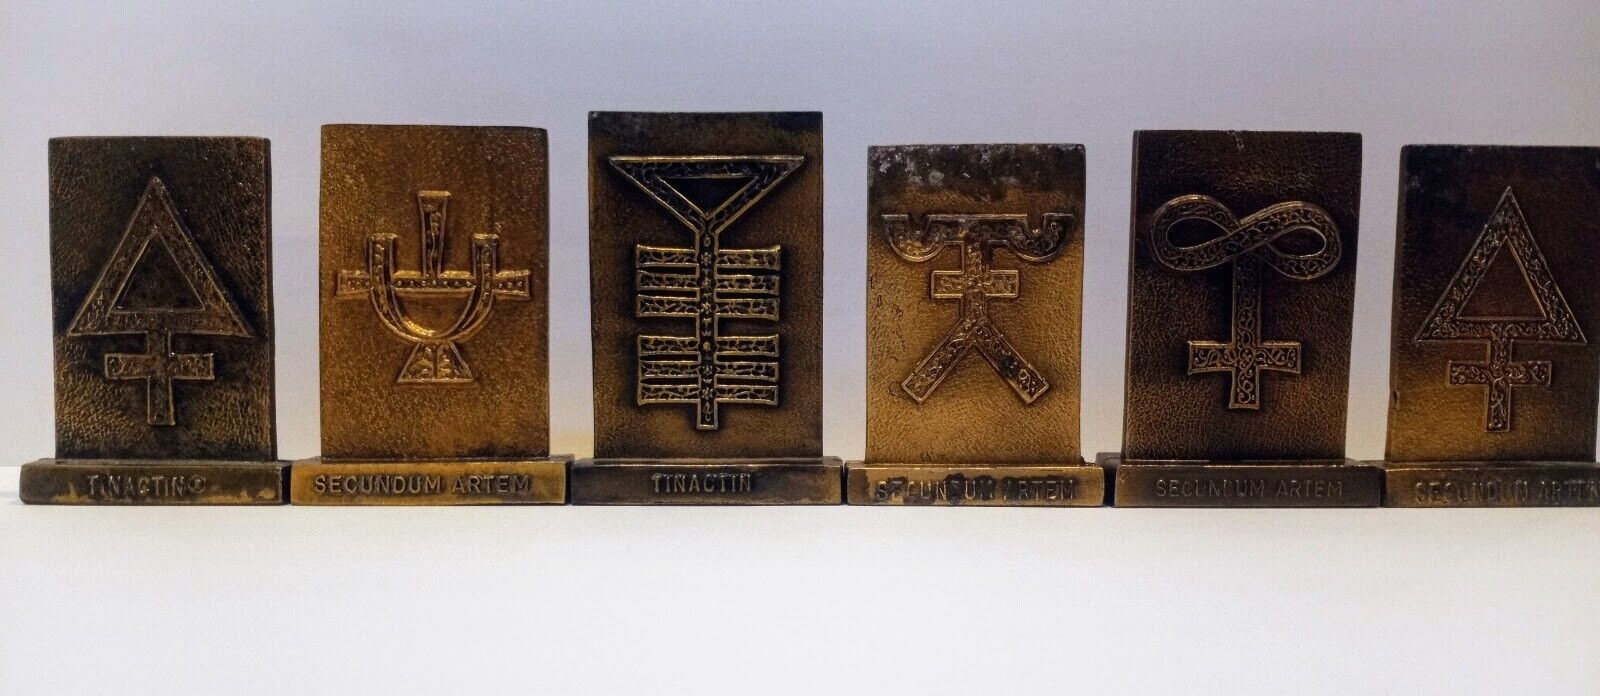 1977-81 Tinactin Apothecary Symbols Bronze Metal Paperweights or Bookends